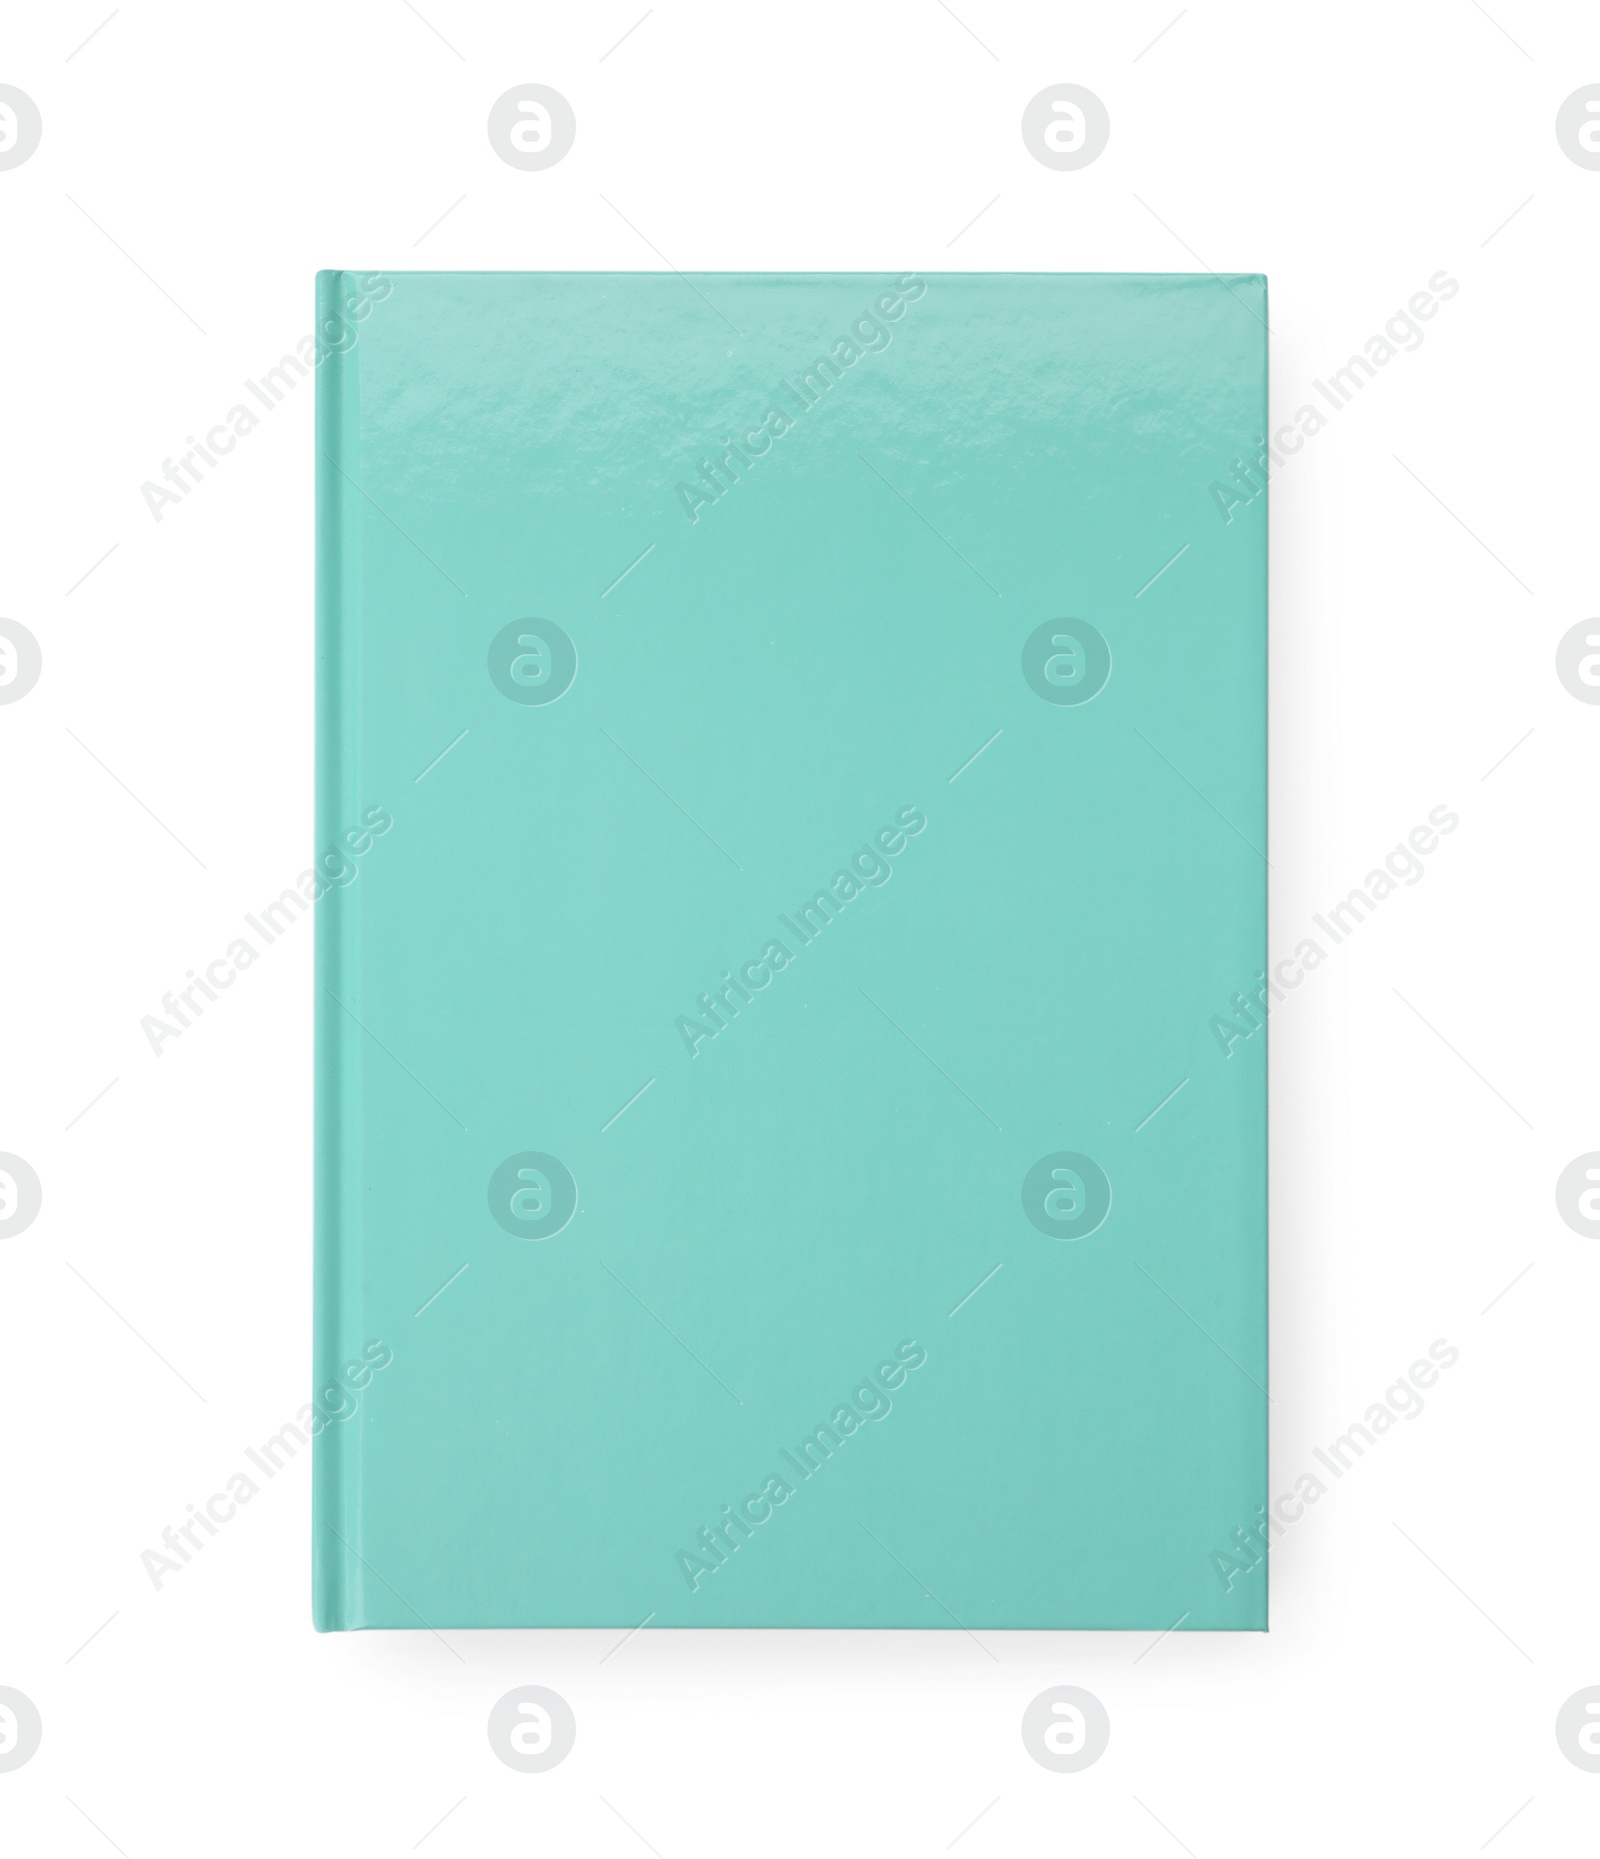 Photo of New turquoise planner isolated on white, top view